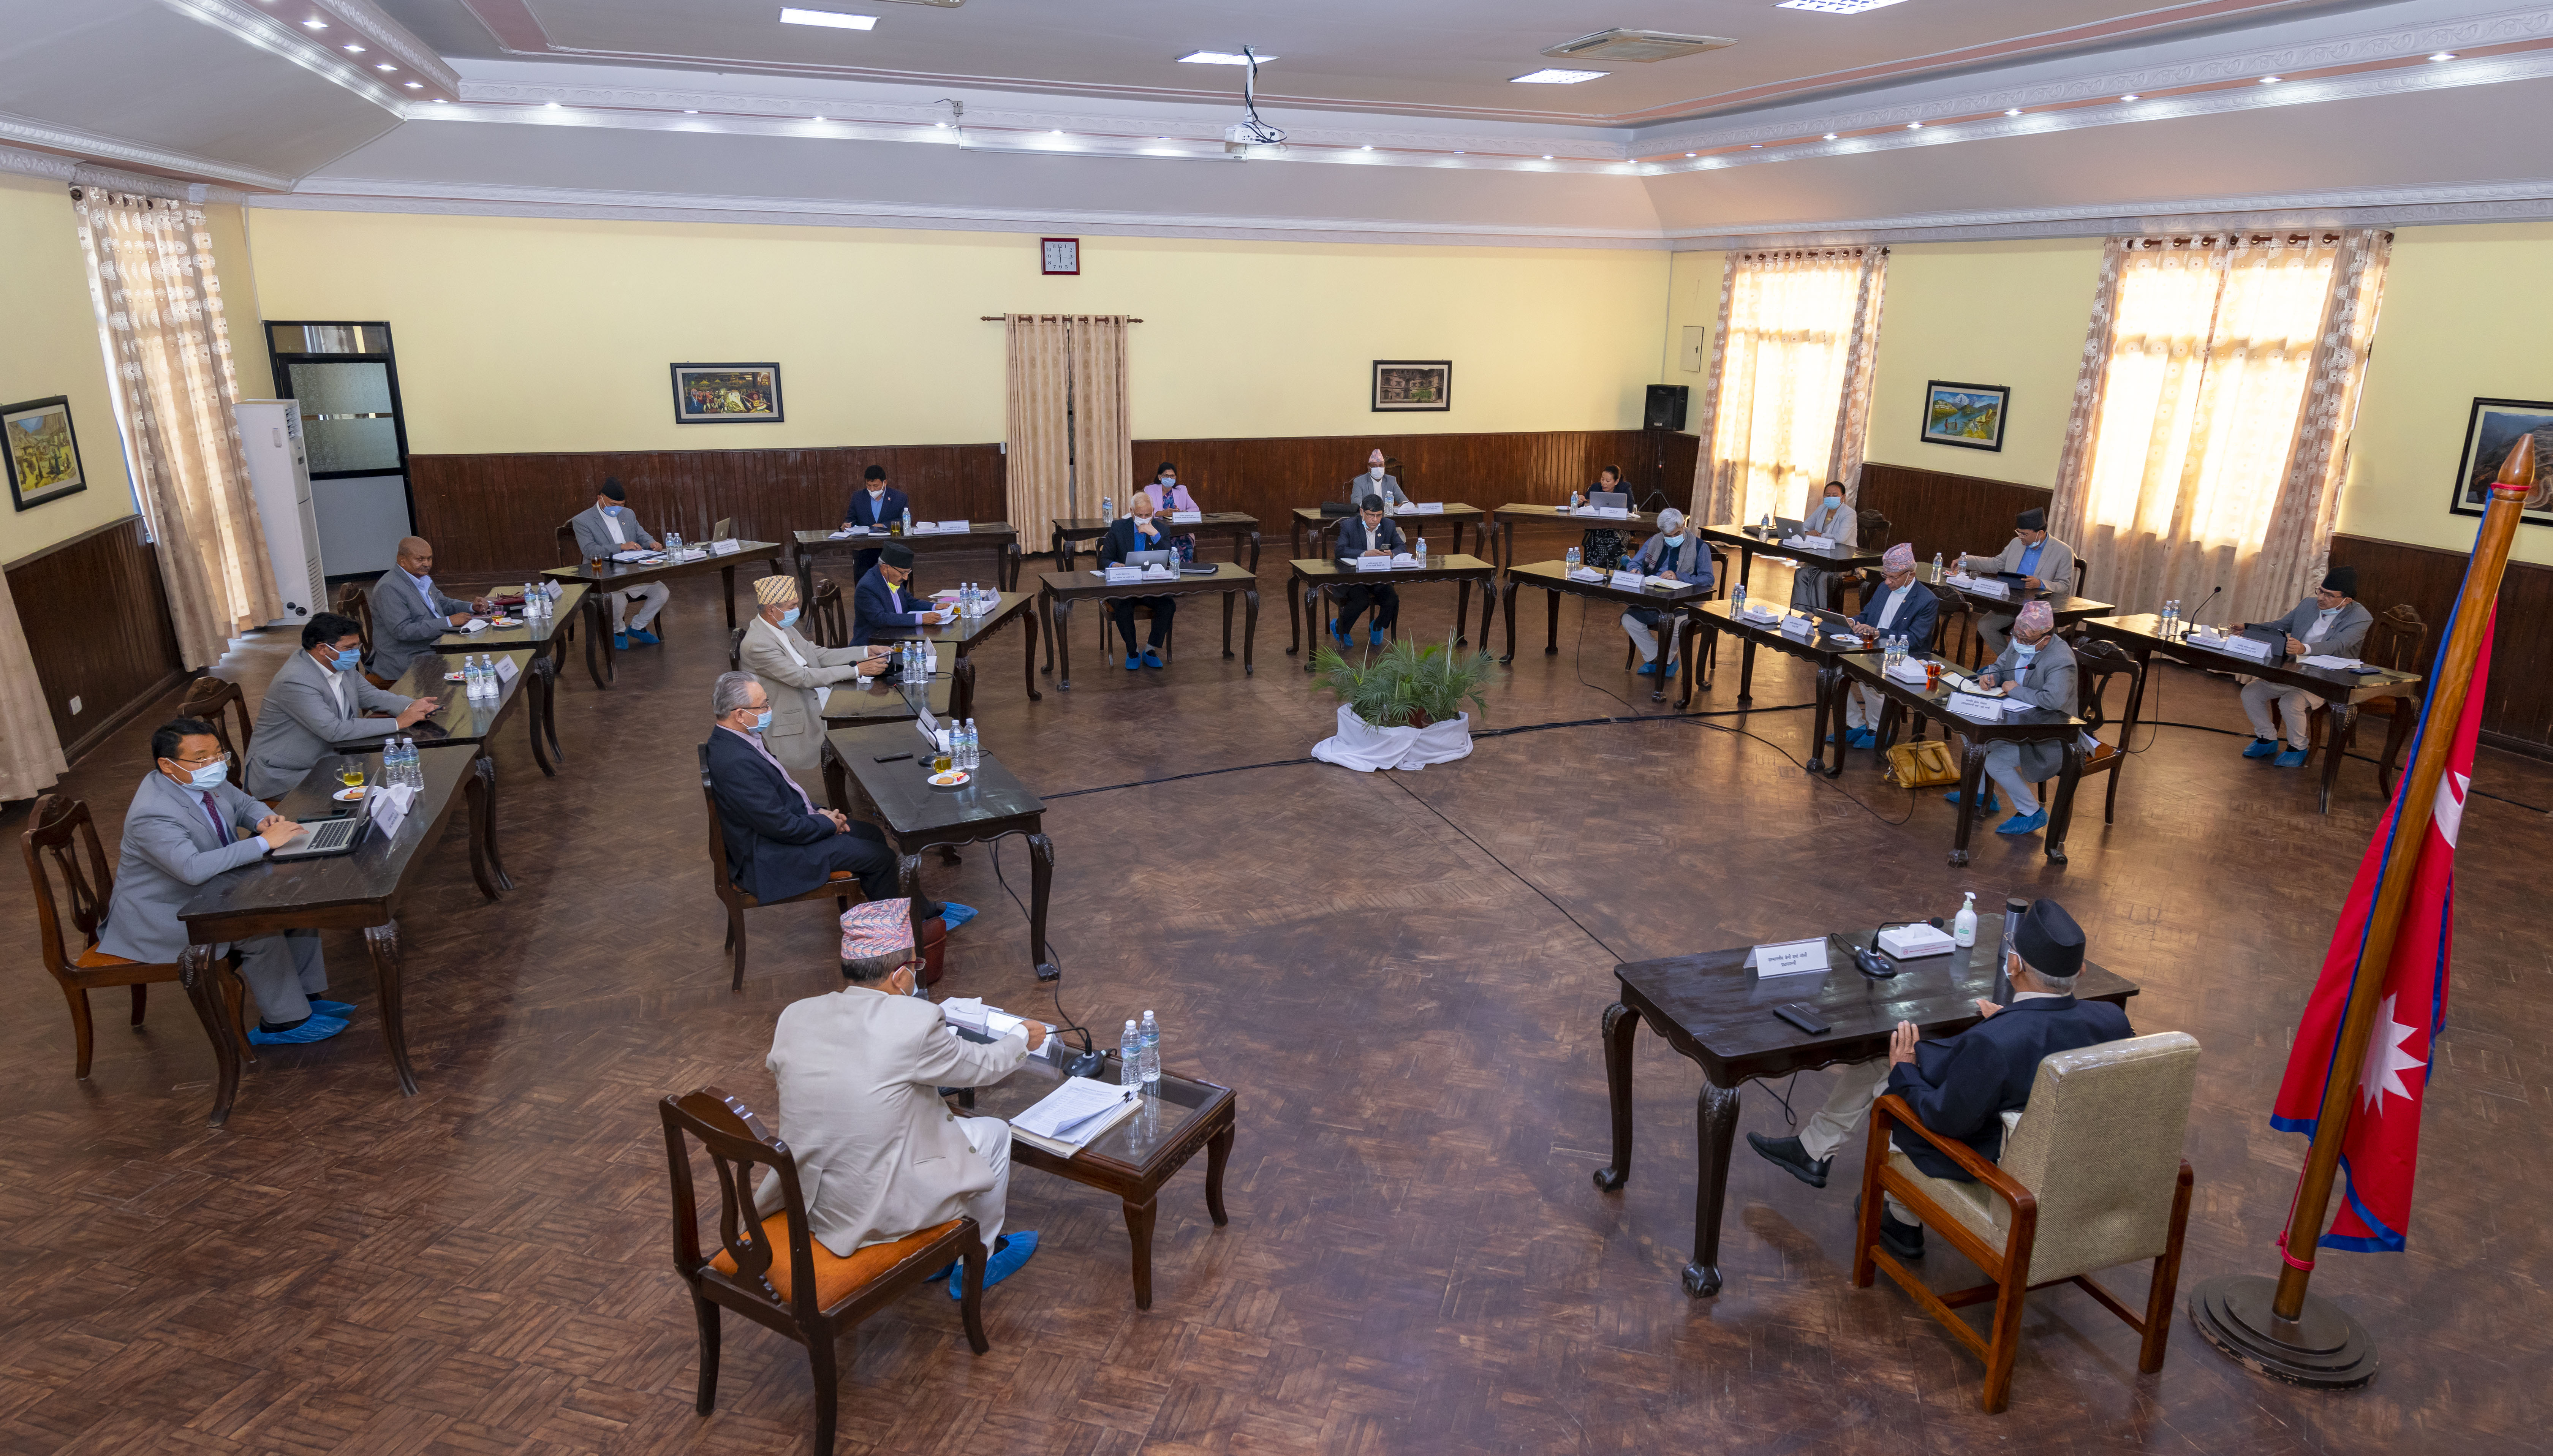 A meeting of the Council of Ministers at Prime Minister's official residence, in Baluwatar, Kathmandu, on Wednesday, June 10, 2020. Photo Courtesy: Rajan Kafle/Prime Minister's Secretariat